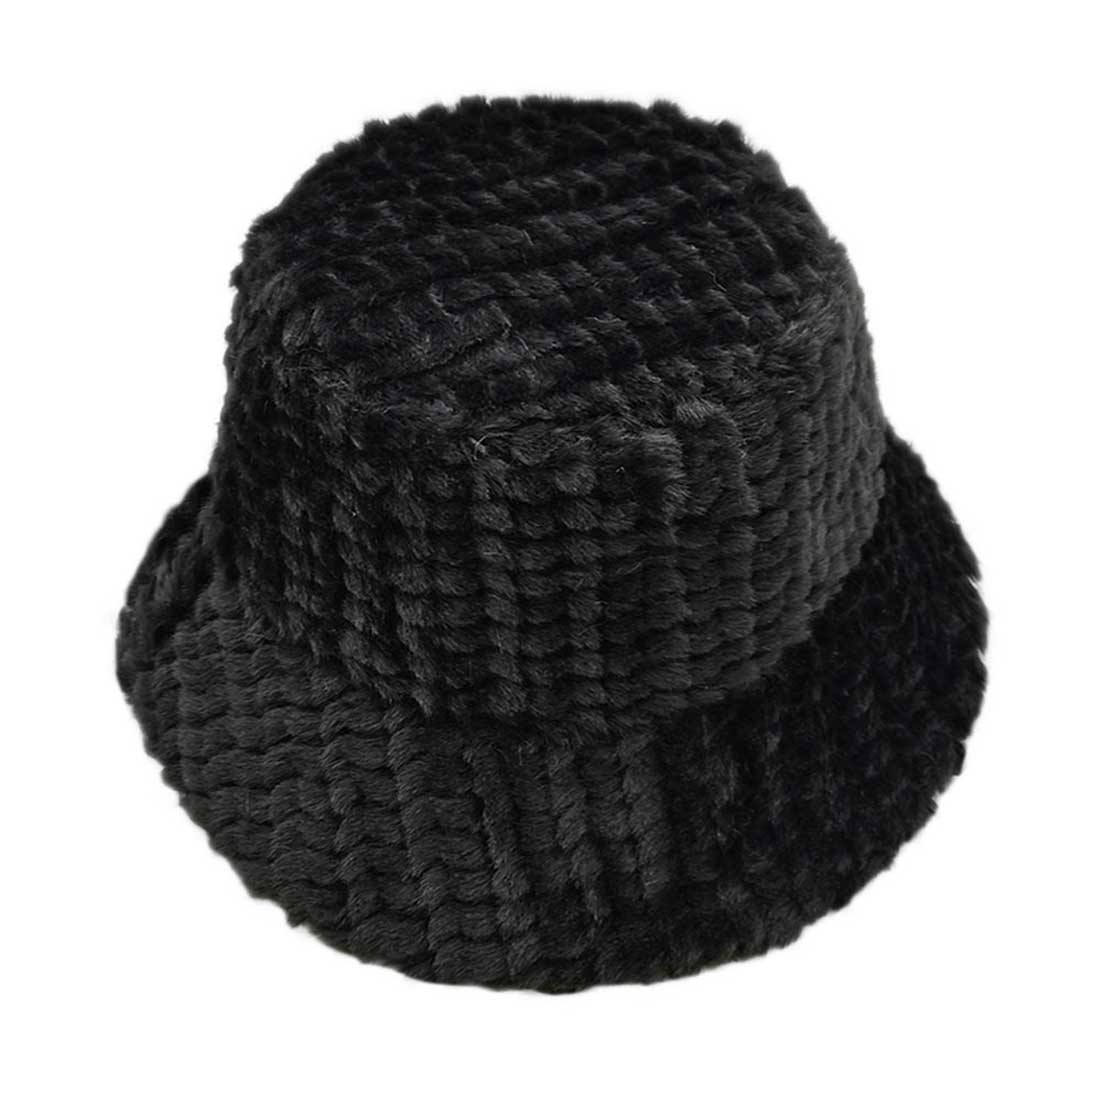 Black Fuzzy Faux Fur Bucket Hat, is a beautiful addition to your attire. before running out the door into the cool air, you’ll want to reach for this toasty bucket hat to keep you incredibly warm. Accessorize the fun way with this solid faux fur bucket hat, it's the autumnal touch you need to finish your outfit in style. Awesome winter gift accessory! Perfect Gift Birthday, Christmas, Stocking Stuffer, Secret Santa, Holiday, Anniversary, Valentine's Day, Loved One.